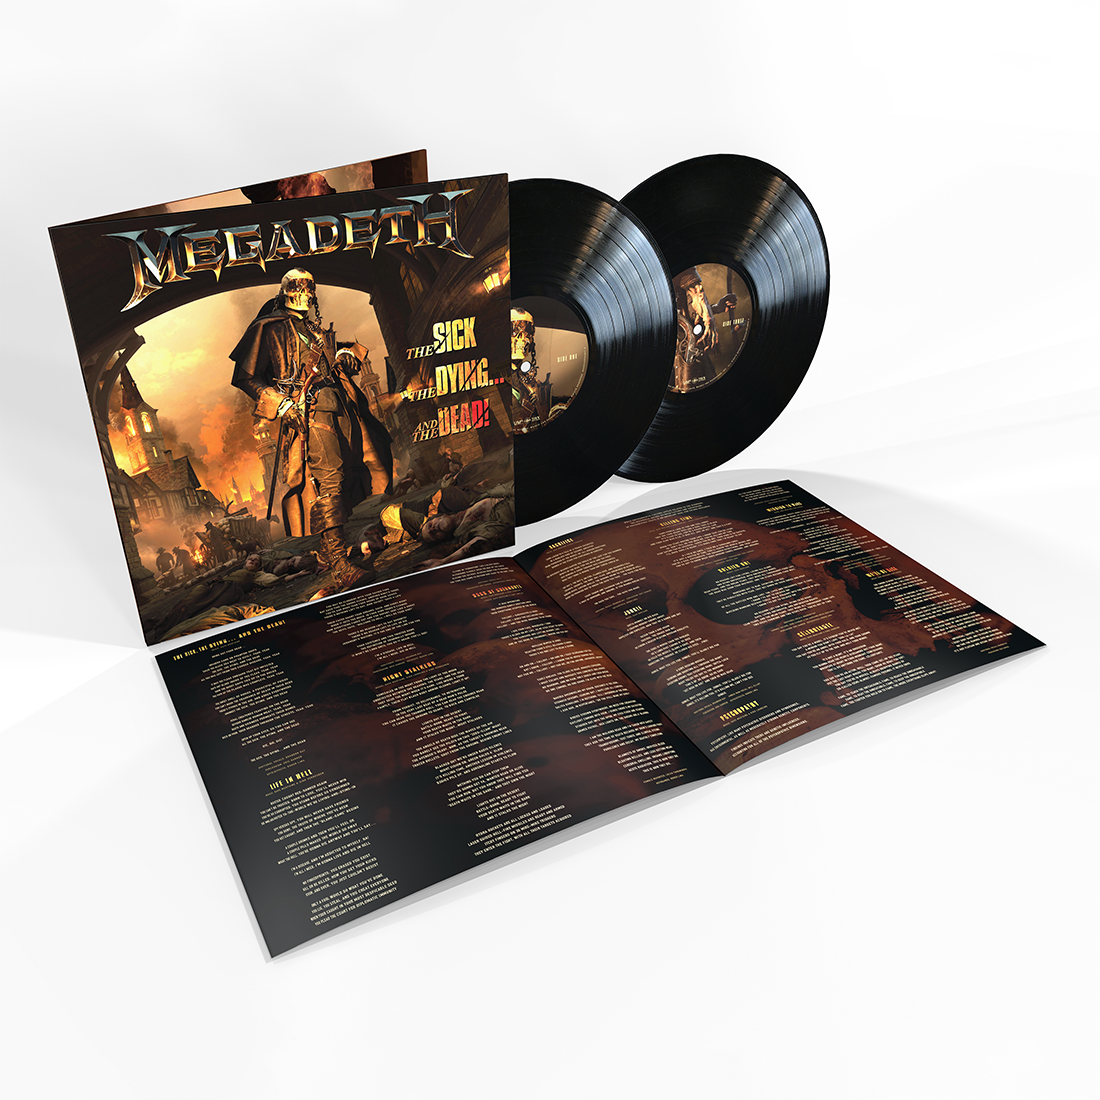 Megadeth - The Sick, The Dying… And The Dead!: Vinyl 2LP